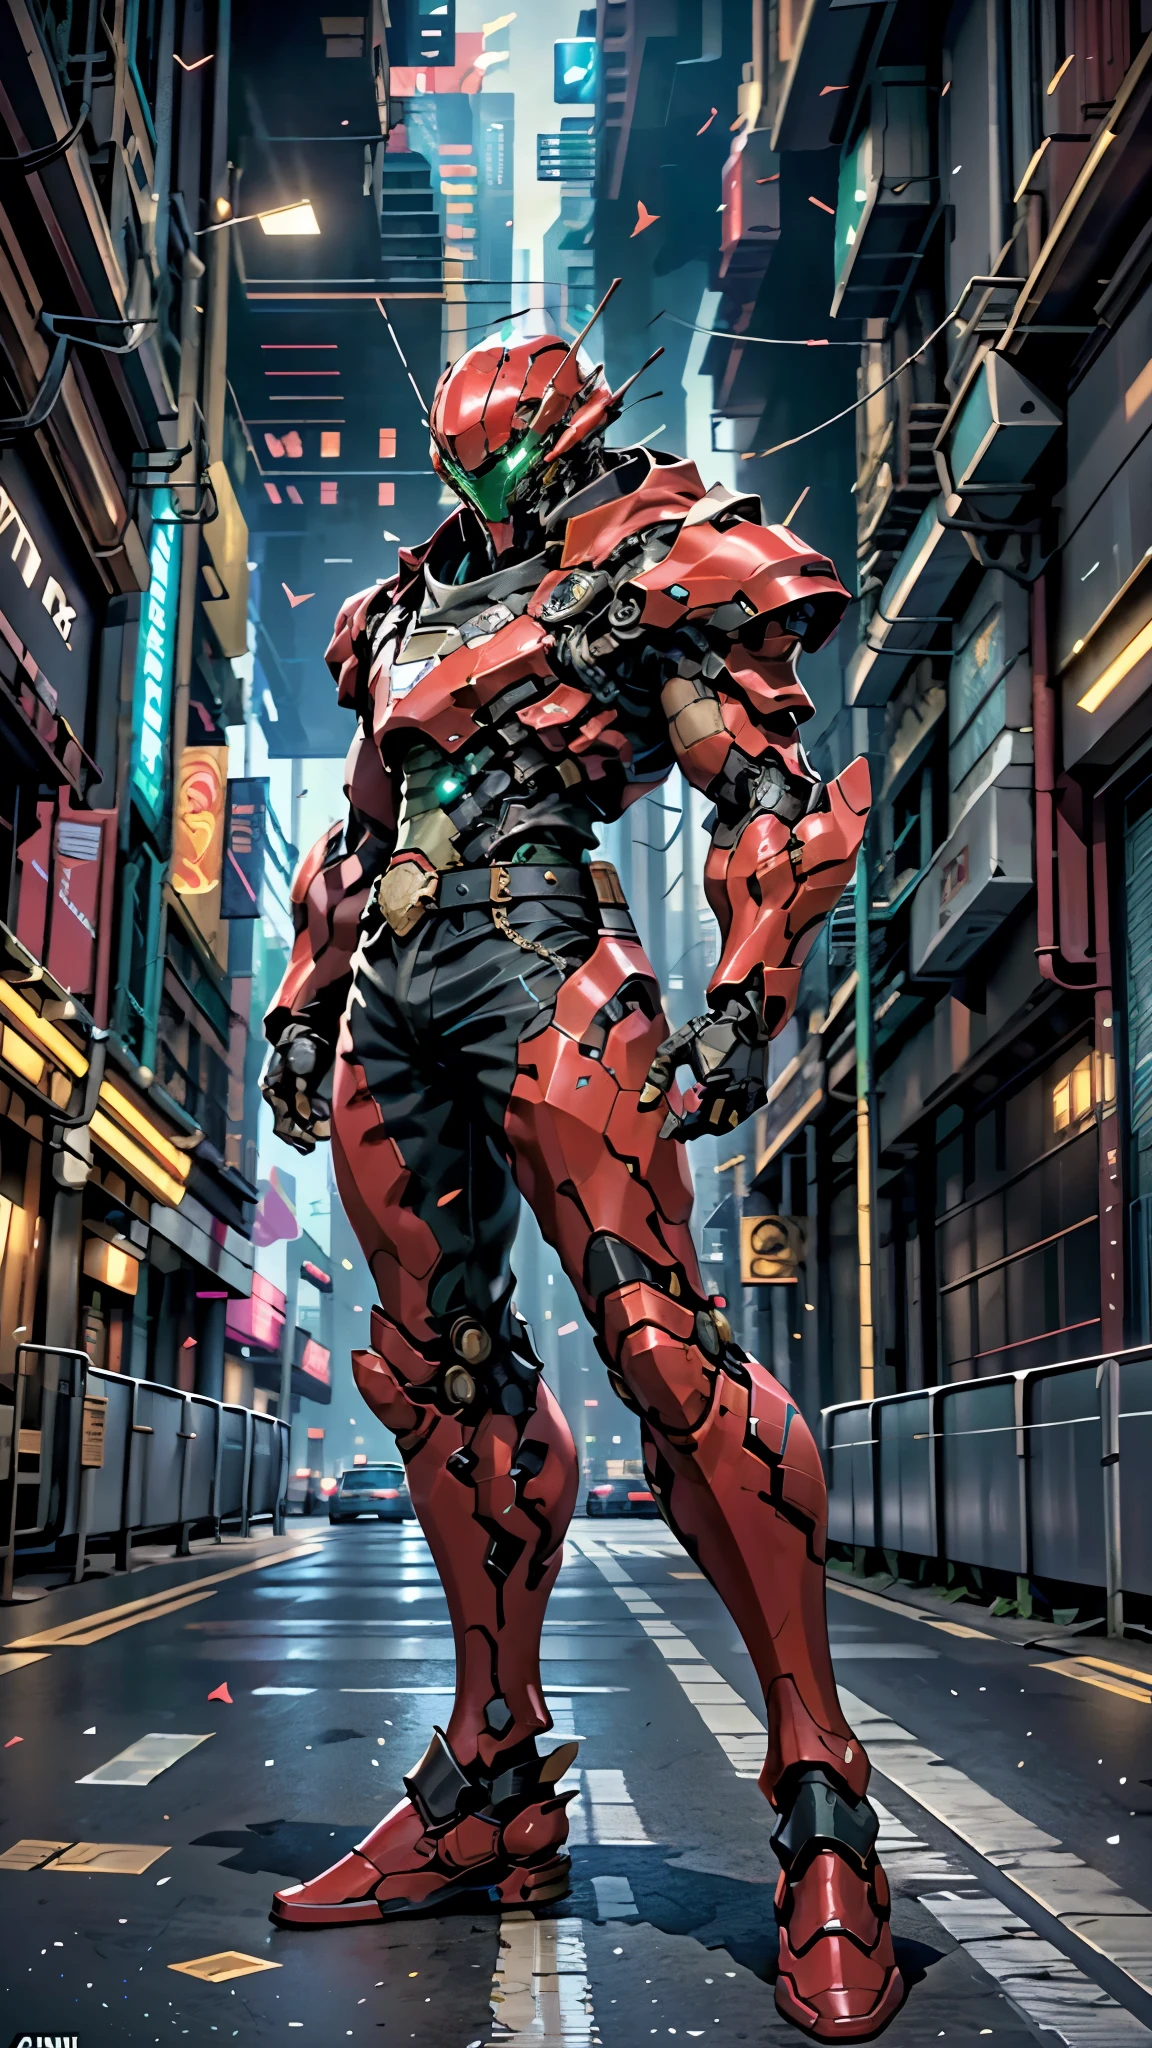 A man wearing a full-face helmet, a fantasy-style biotech armored combat suit, green eyes, (a composite layered chest armor), fully enclosed shoulder guards, matching arm and leg guards, the belt is adorned with exhaust pipes, (the color scheme is primarily black glow with green and red accents), the design balances heavy with agility, a high-tech bio-mecha armor, (Armor Concept Inspired by Cyberpunk motorcycle, stand on the top of a skyscraper in a futuristic sci-fi city), this character embodies a finely crafted fantasy-surreal style armored hero in anime style, exquisite and mature manga art style, (battle damage, element, plasma, energy, the armor glows), ((male:1.5)), metallic, real texture material, dramatic, high definition, best quality, highres, ultra-detailed, ultra-fine painting, extremely delicate, professional, perfect body proportions, golden ratio, anatomically correct, symmetrical face, extremely detailed eyes and face, high quality eyes, creativity, RAW photo, UHD, 32k, Natural light, cinematic lighting, masterpiece-anatomy-perfect, masterpiece:1.5